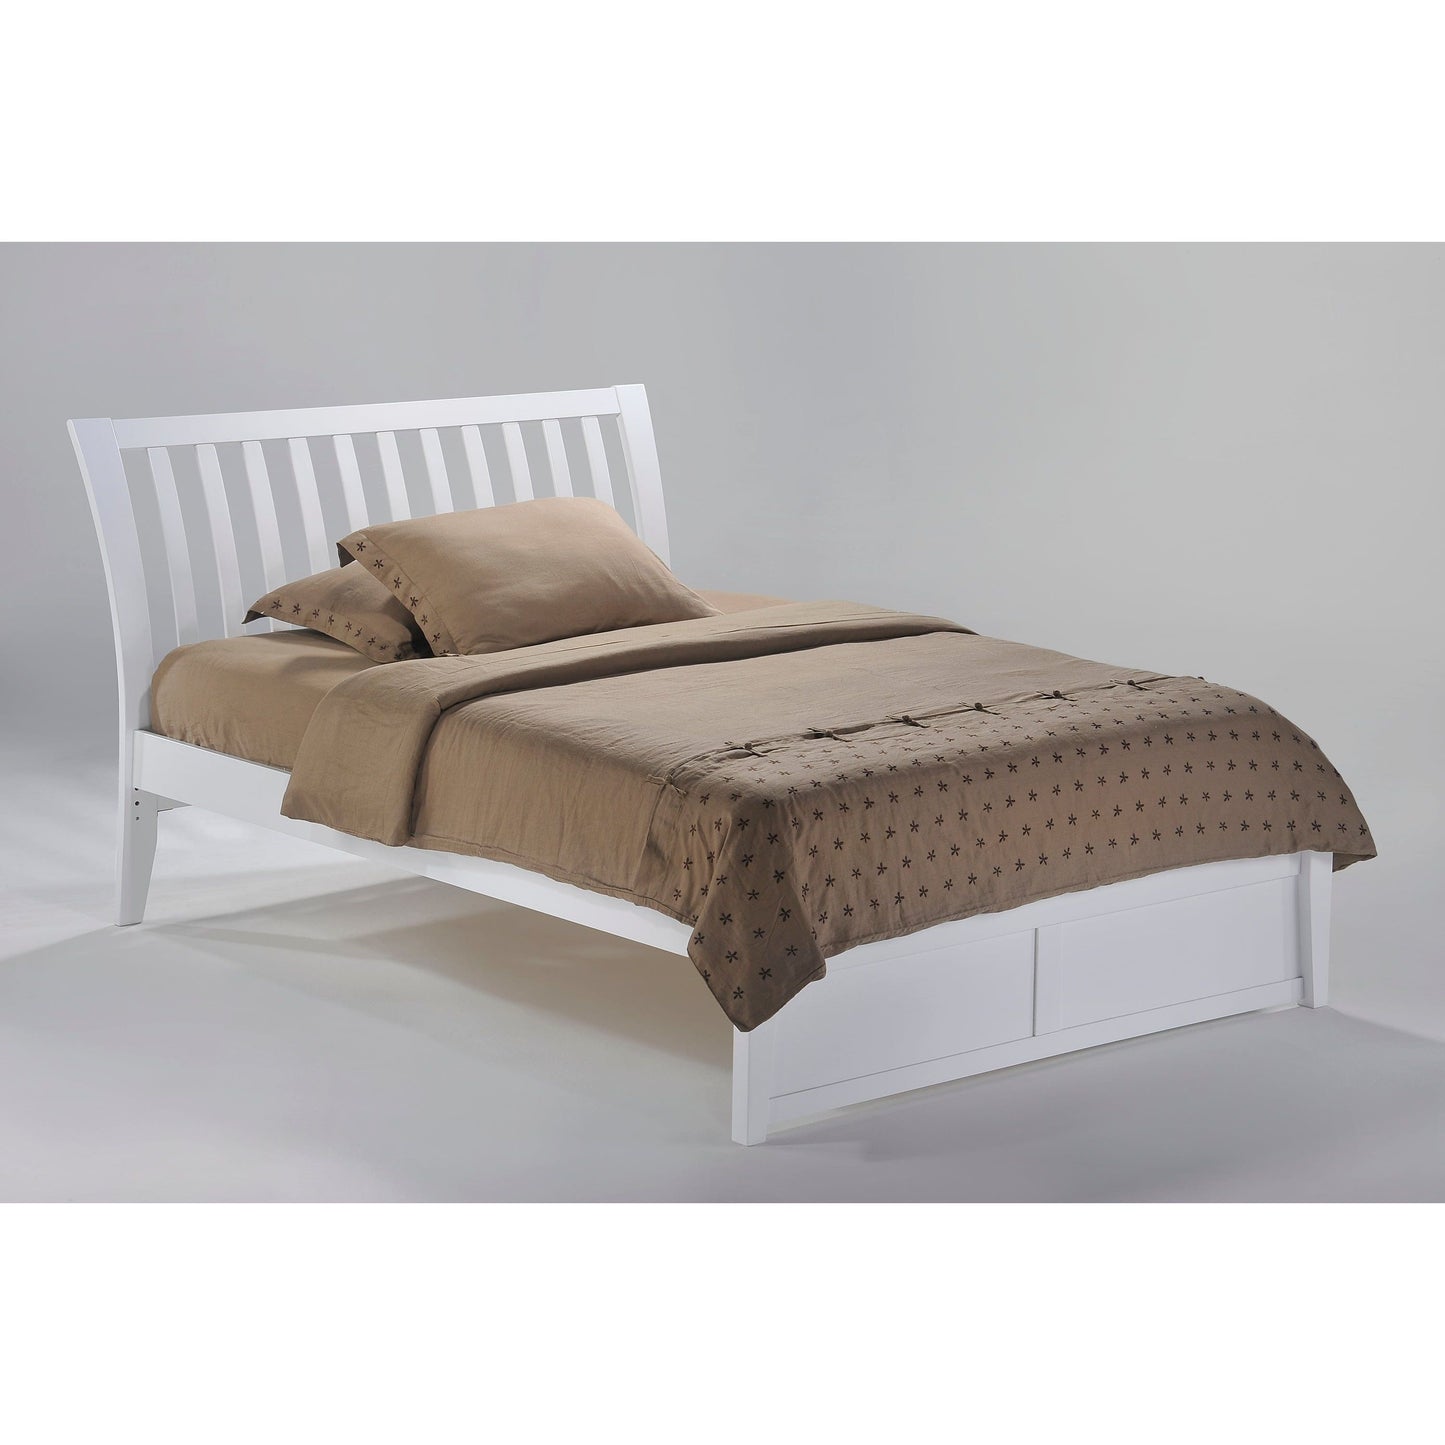 The Bedroom Emporium Twin K Series Nutmeg Bed in cherry finish